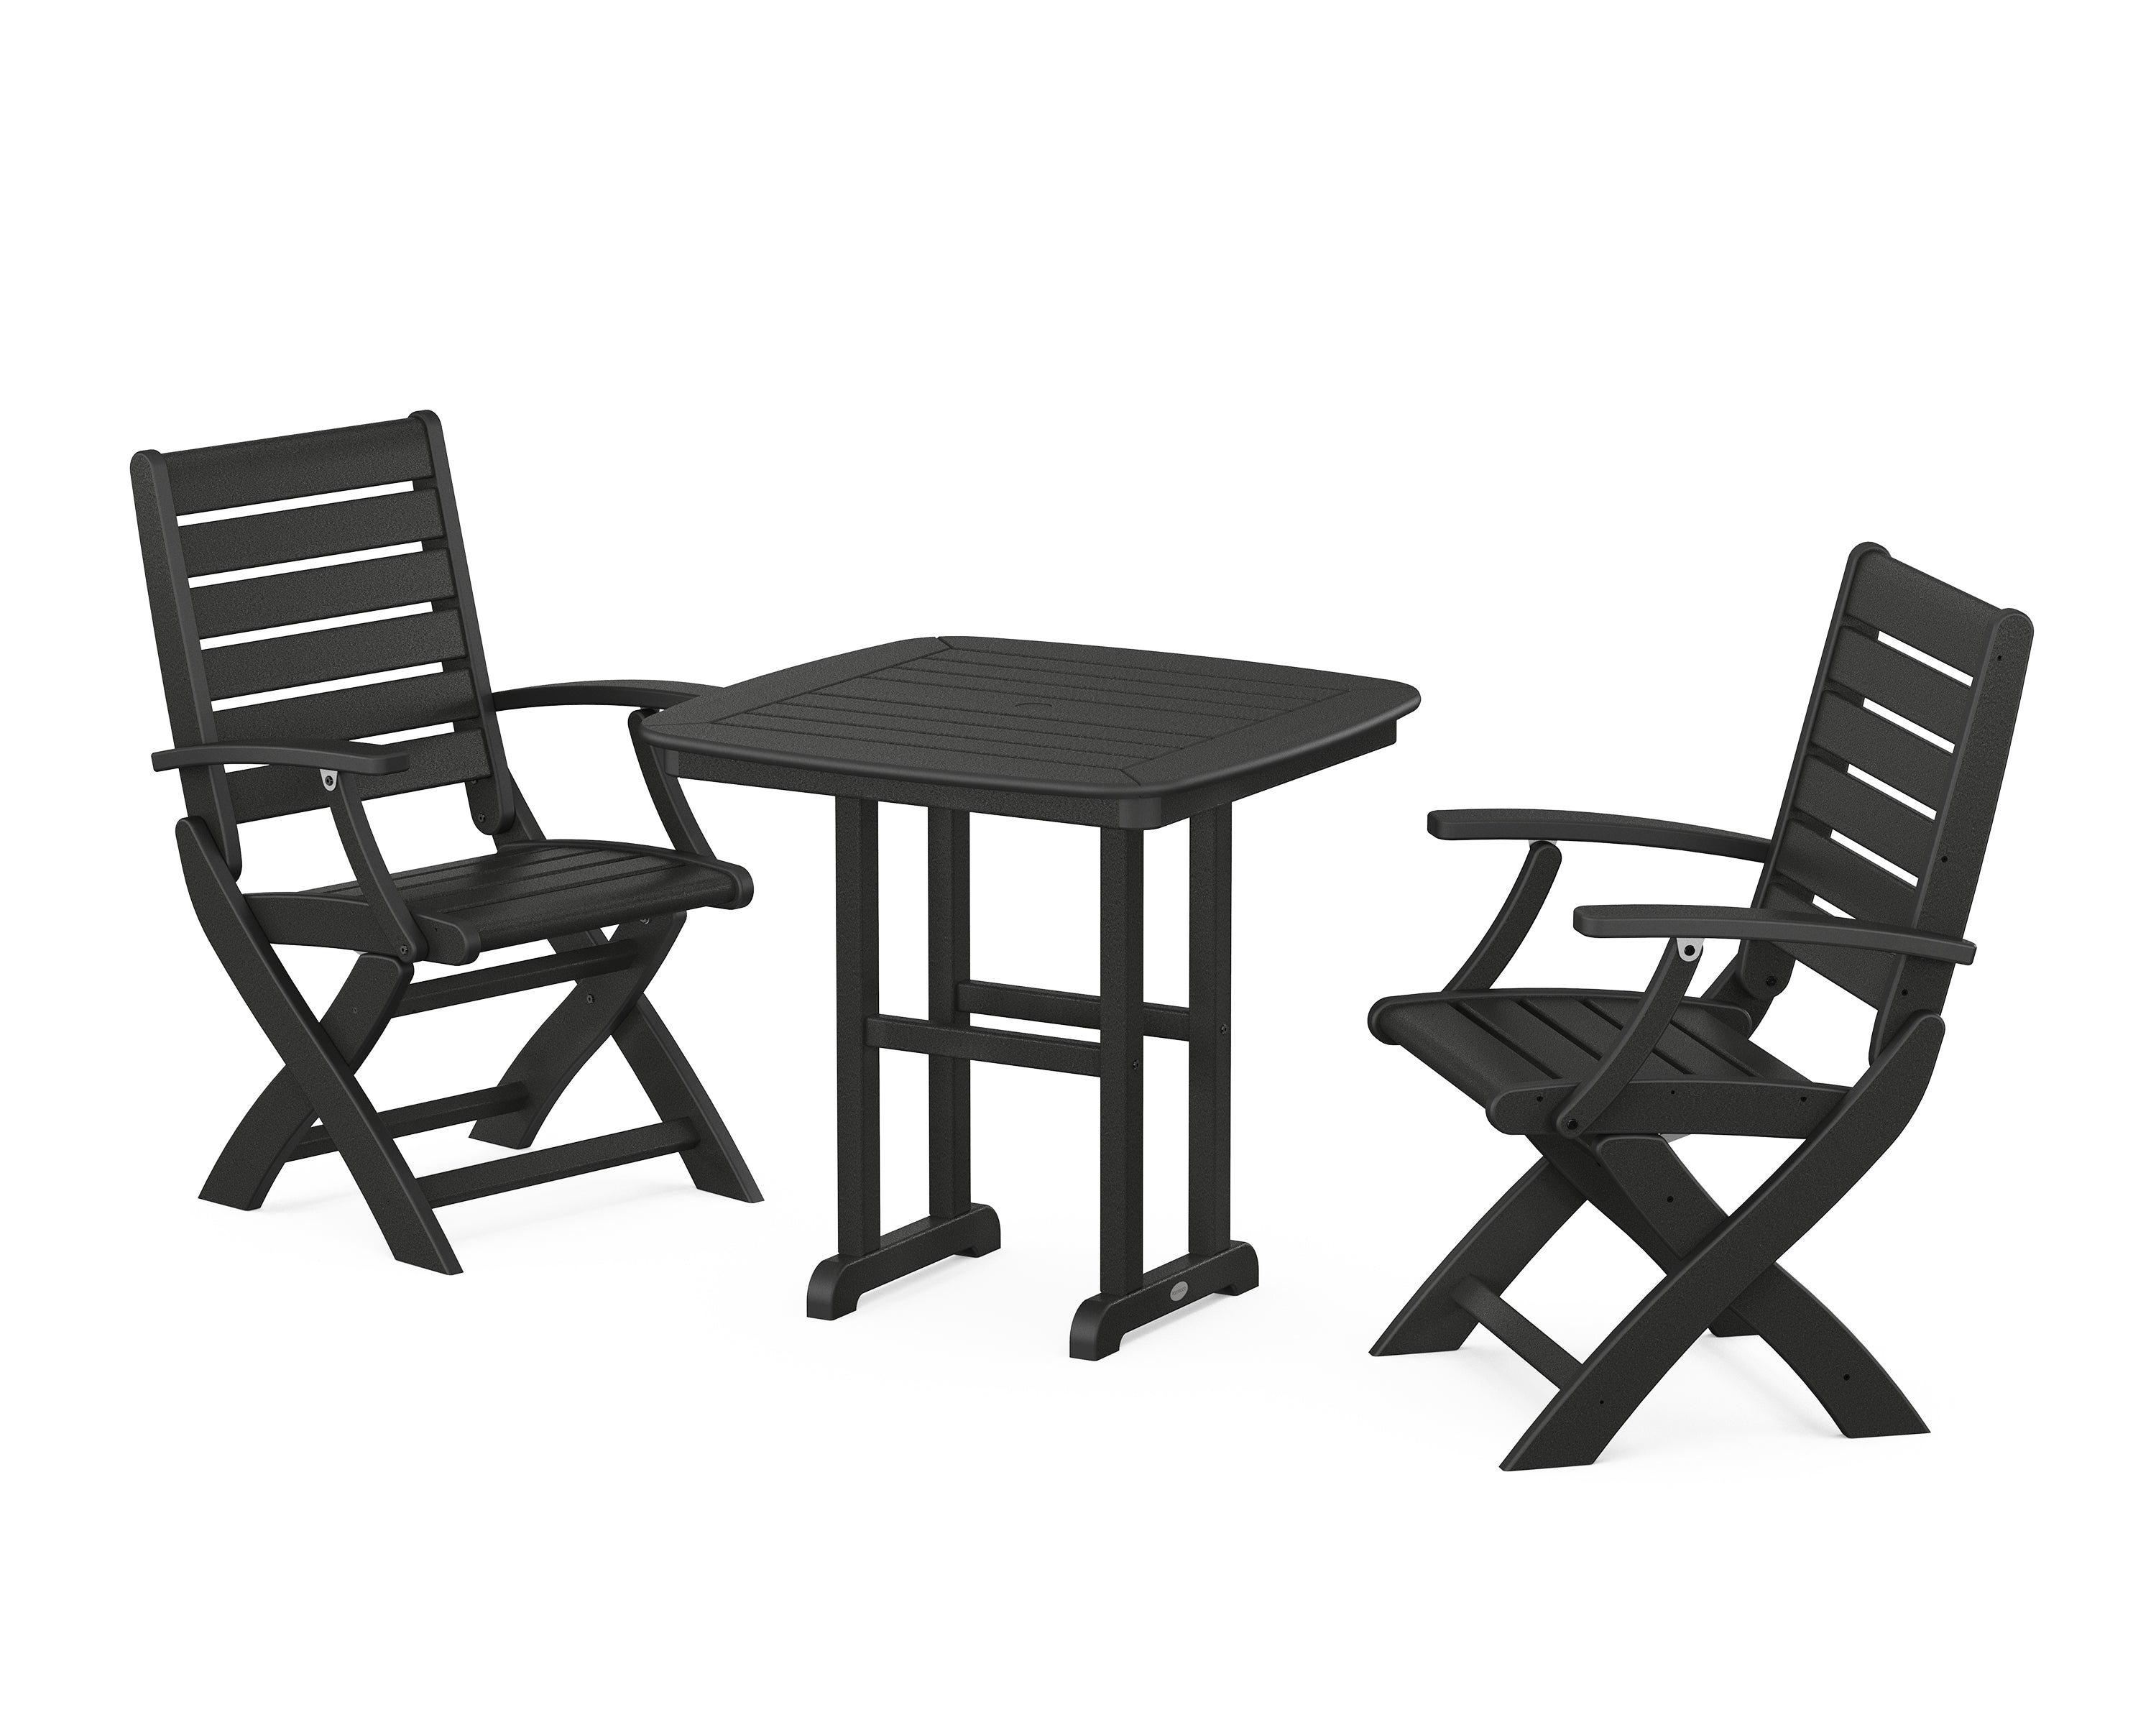 POLYWOOD® Signature Folding Chair 3-Piece Dining Set in Black